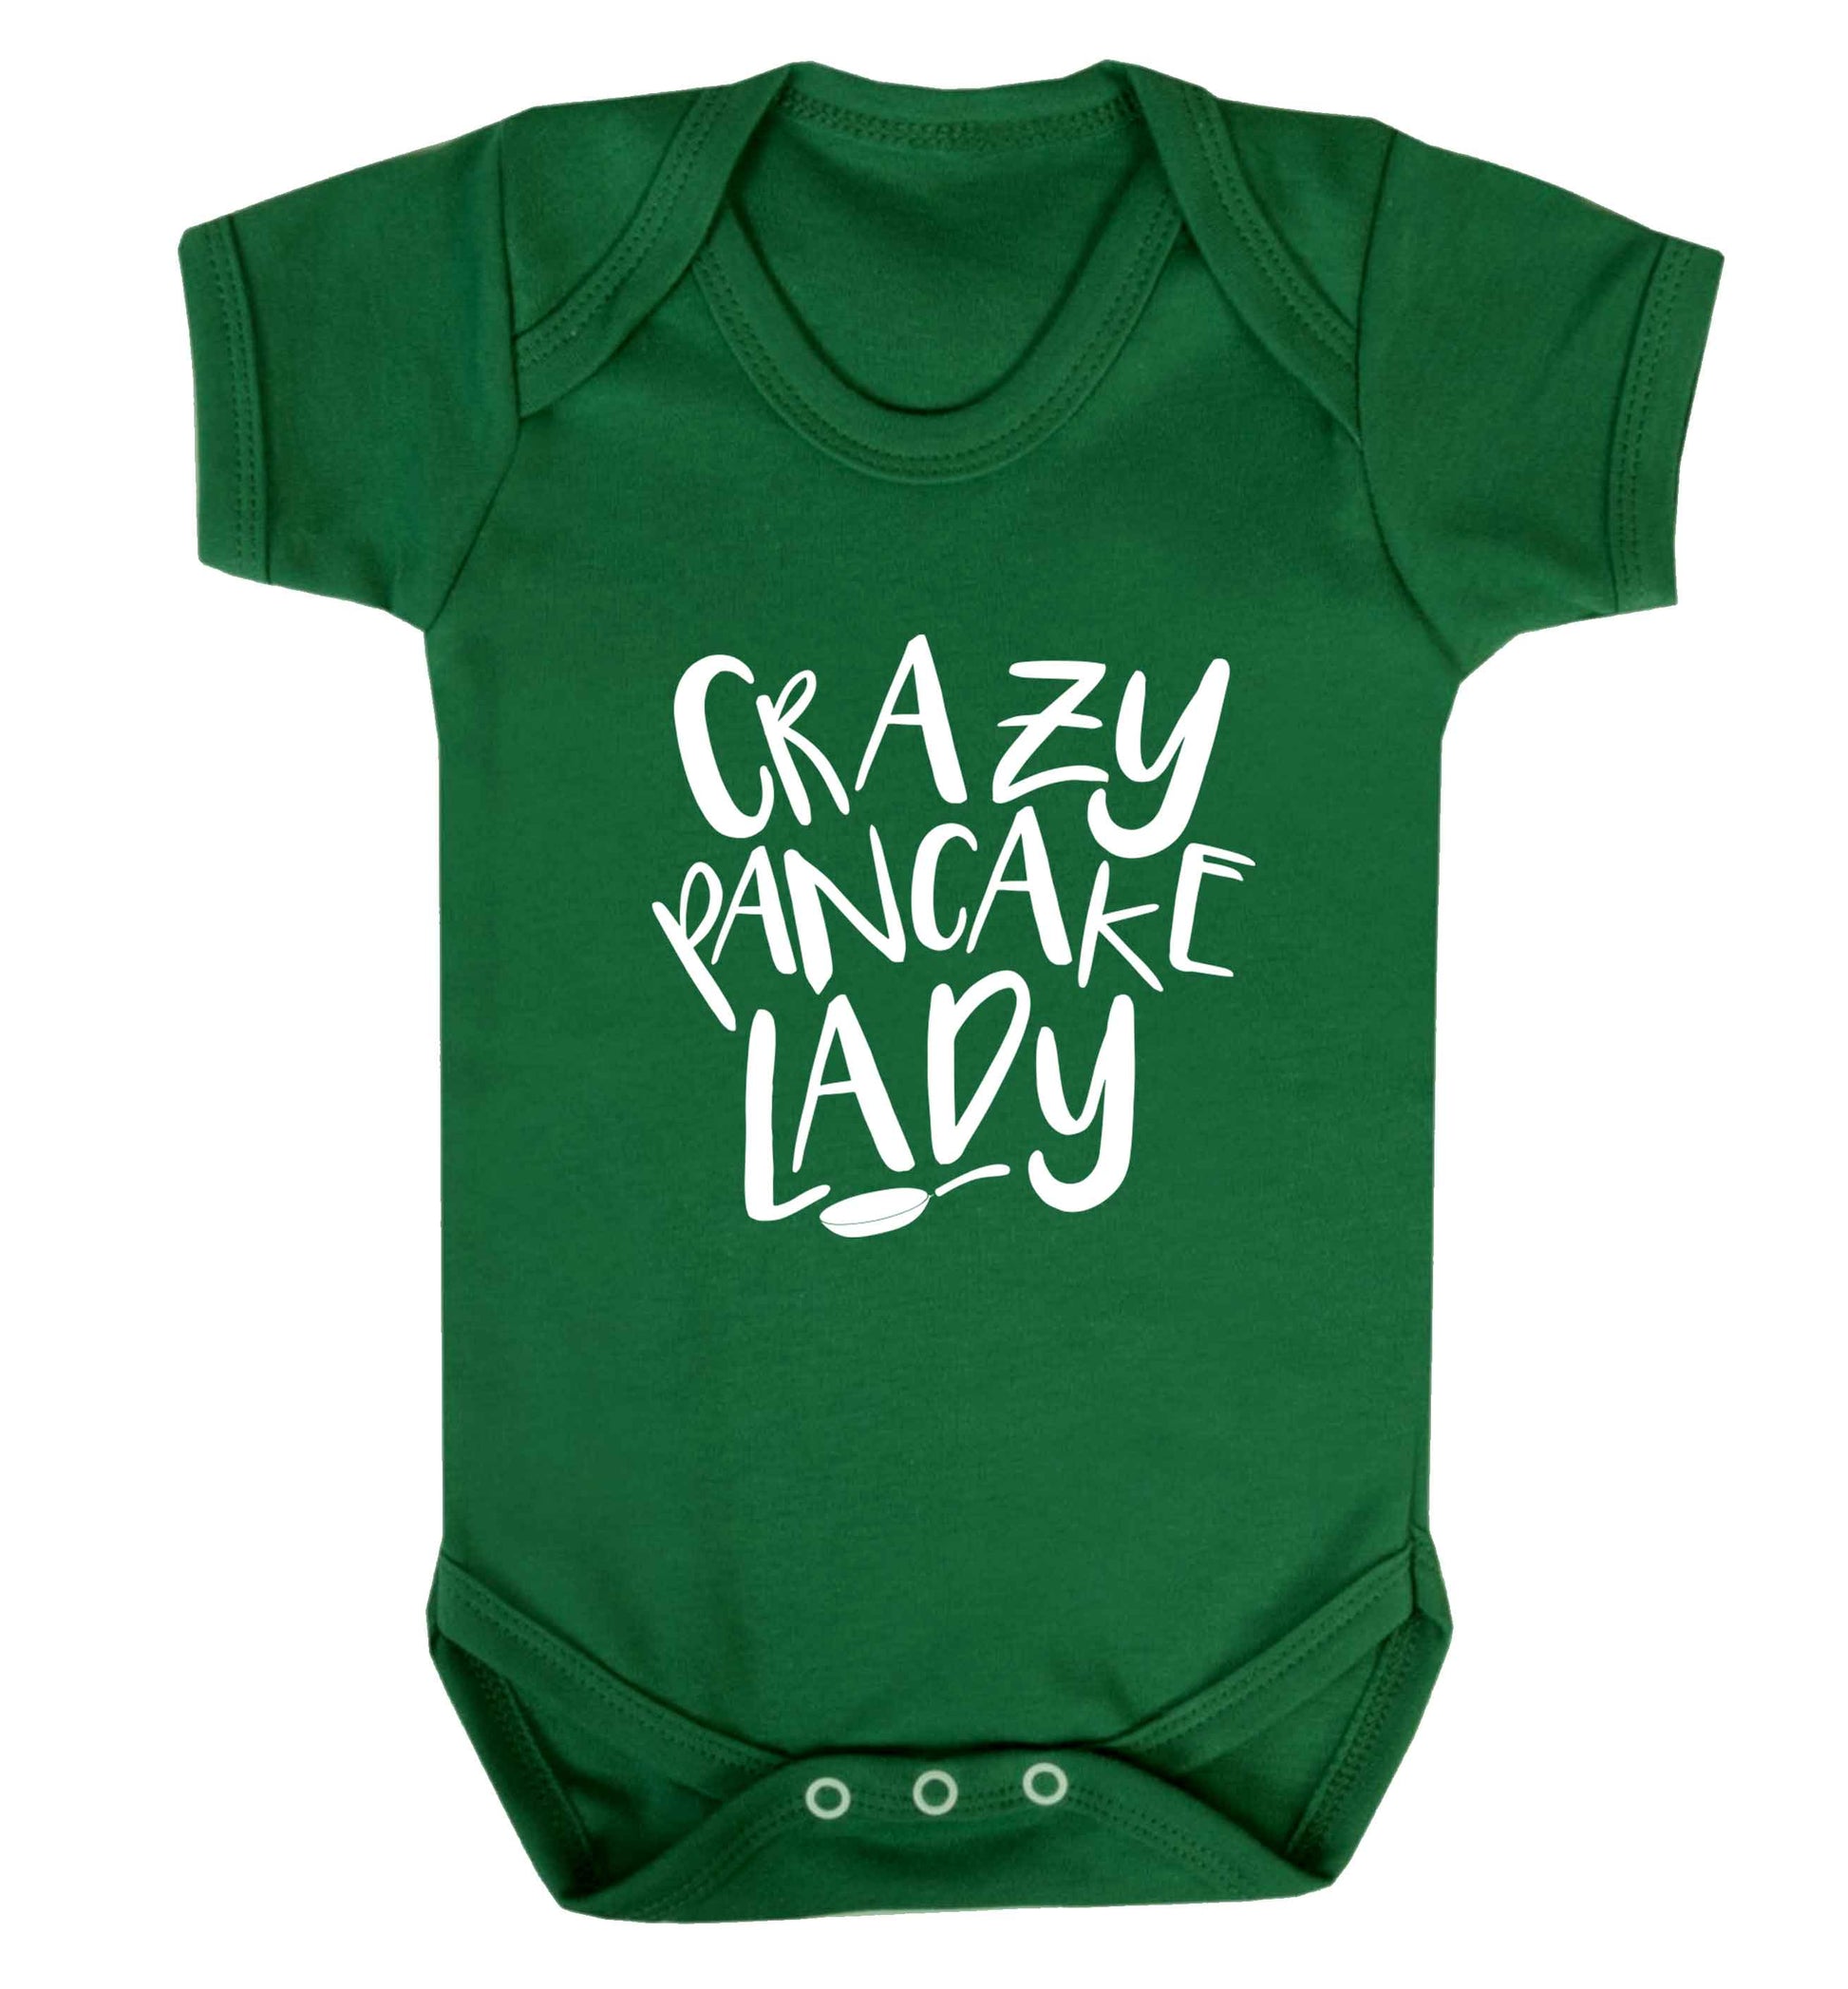 Crazy pancake lady baby vest green 18-24 months